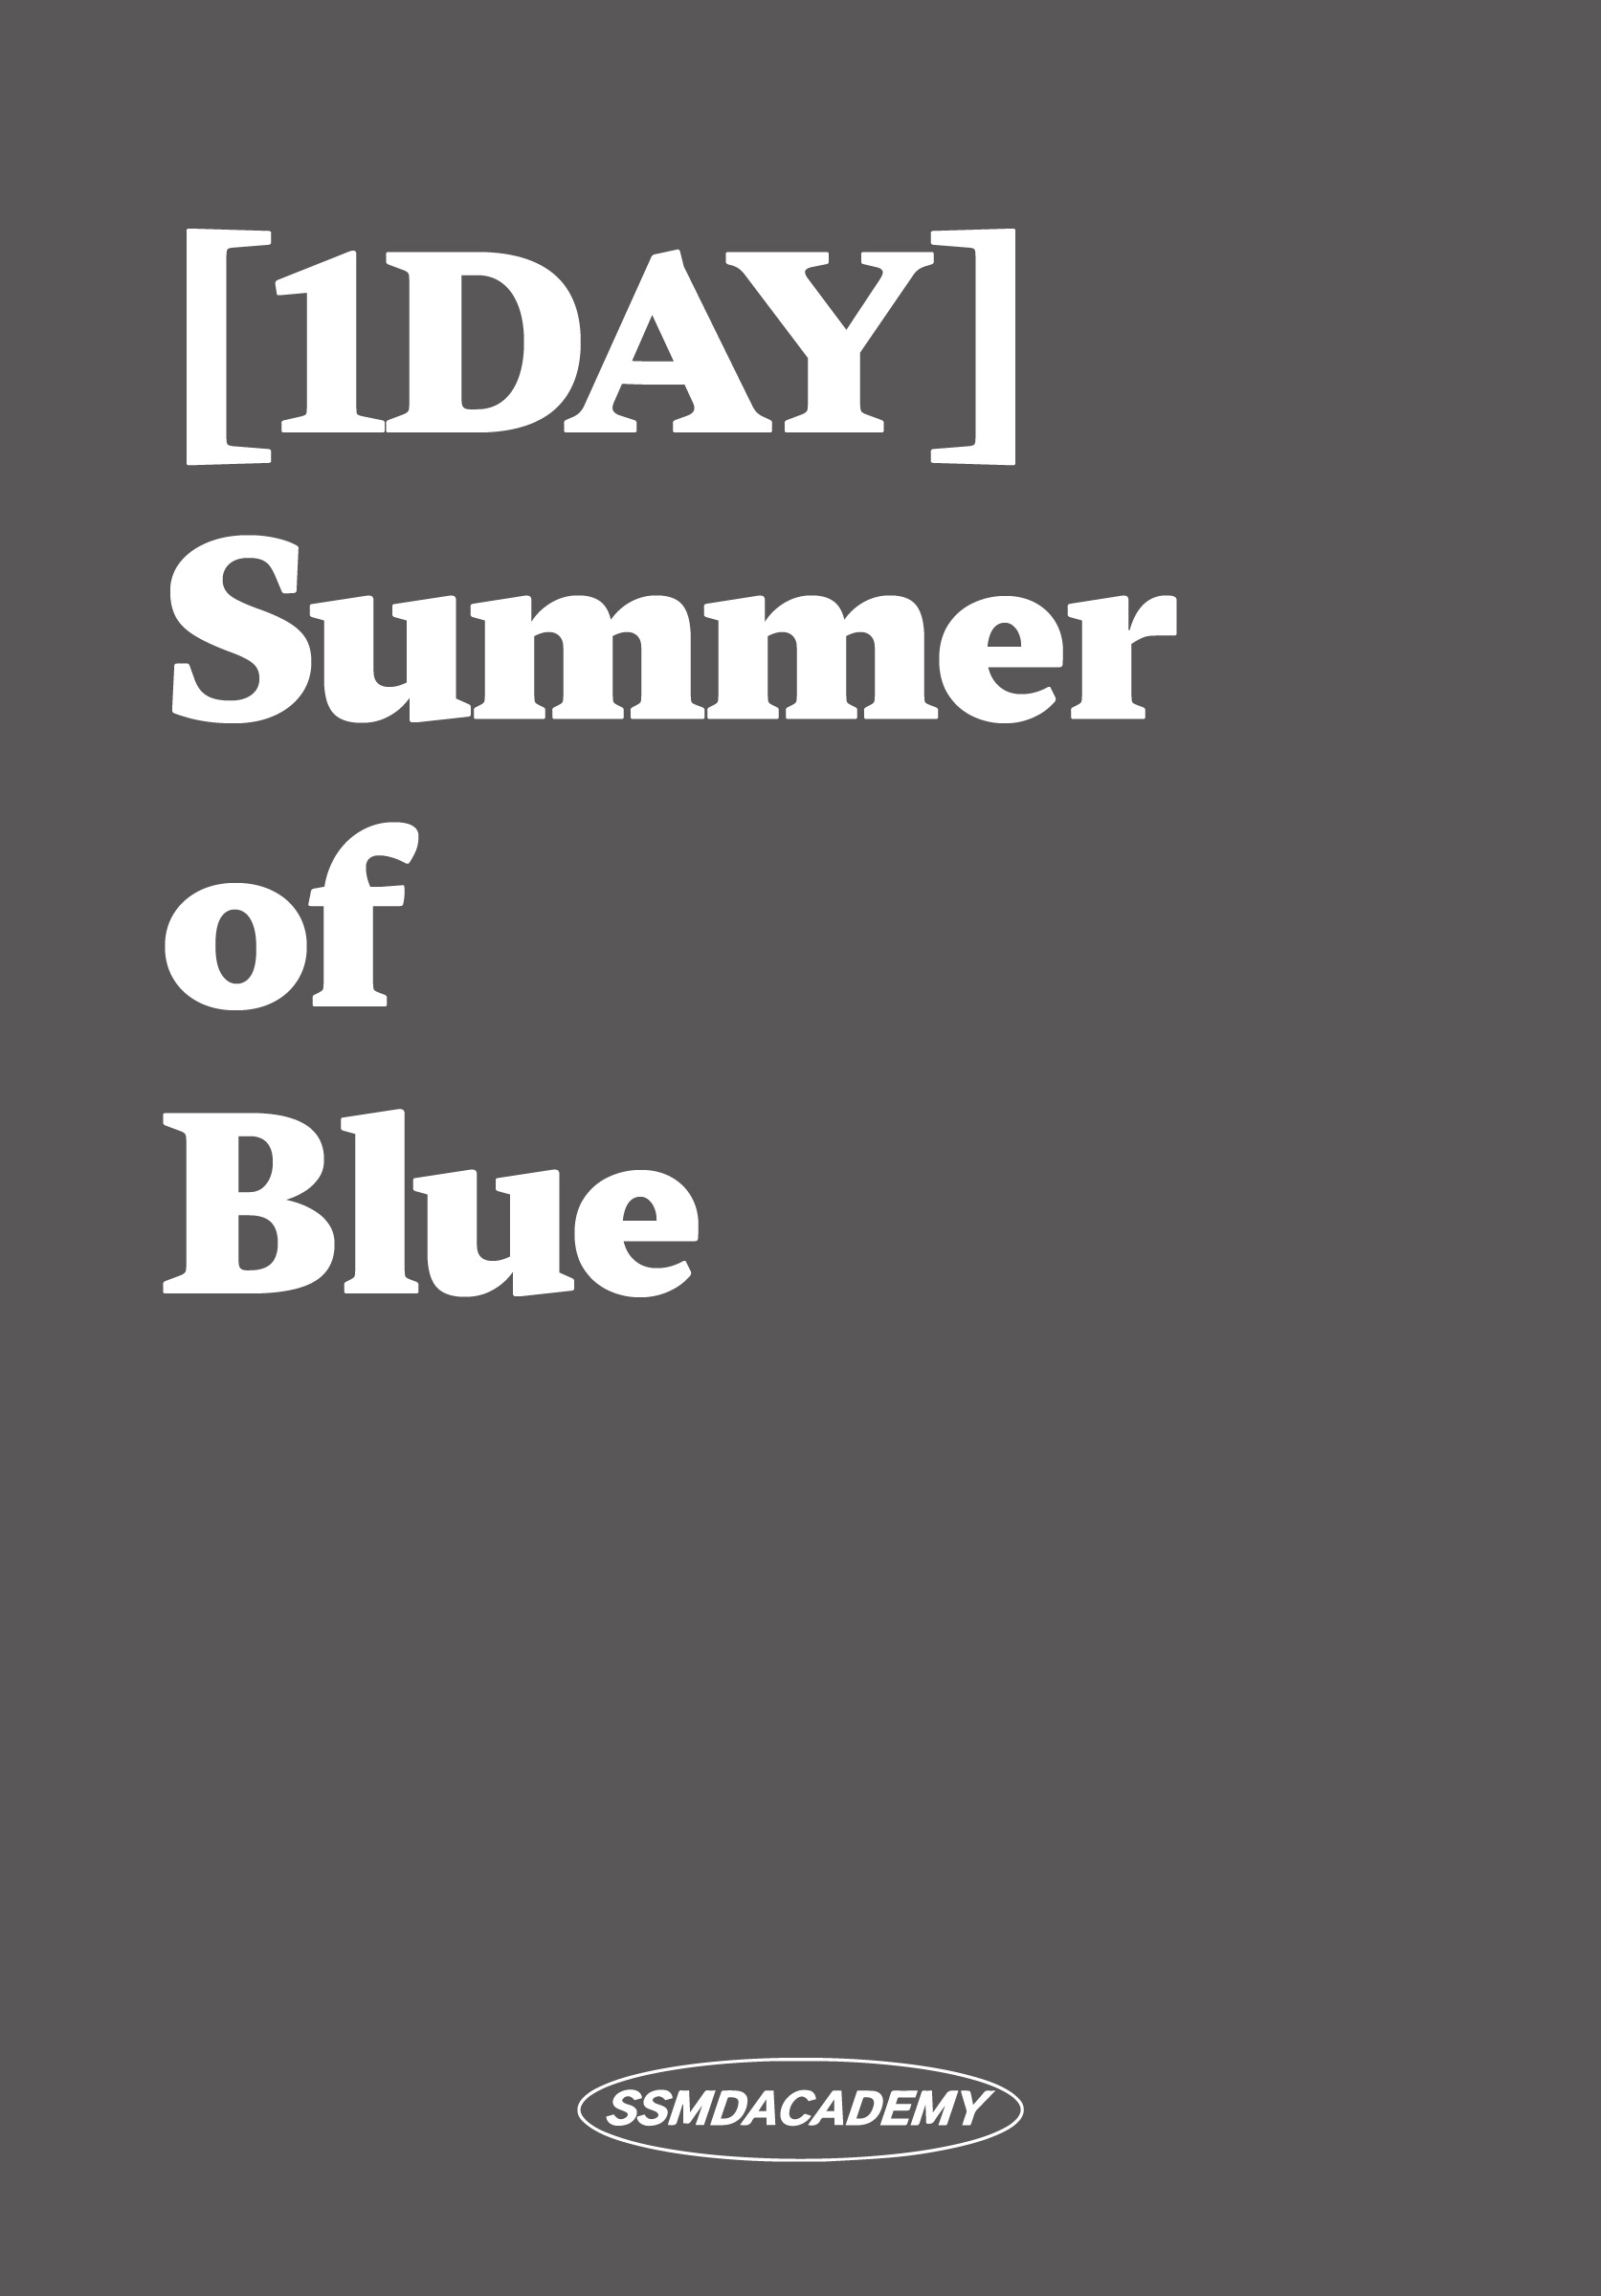 [1DAY] Summer of Blue